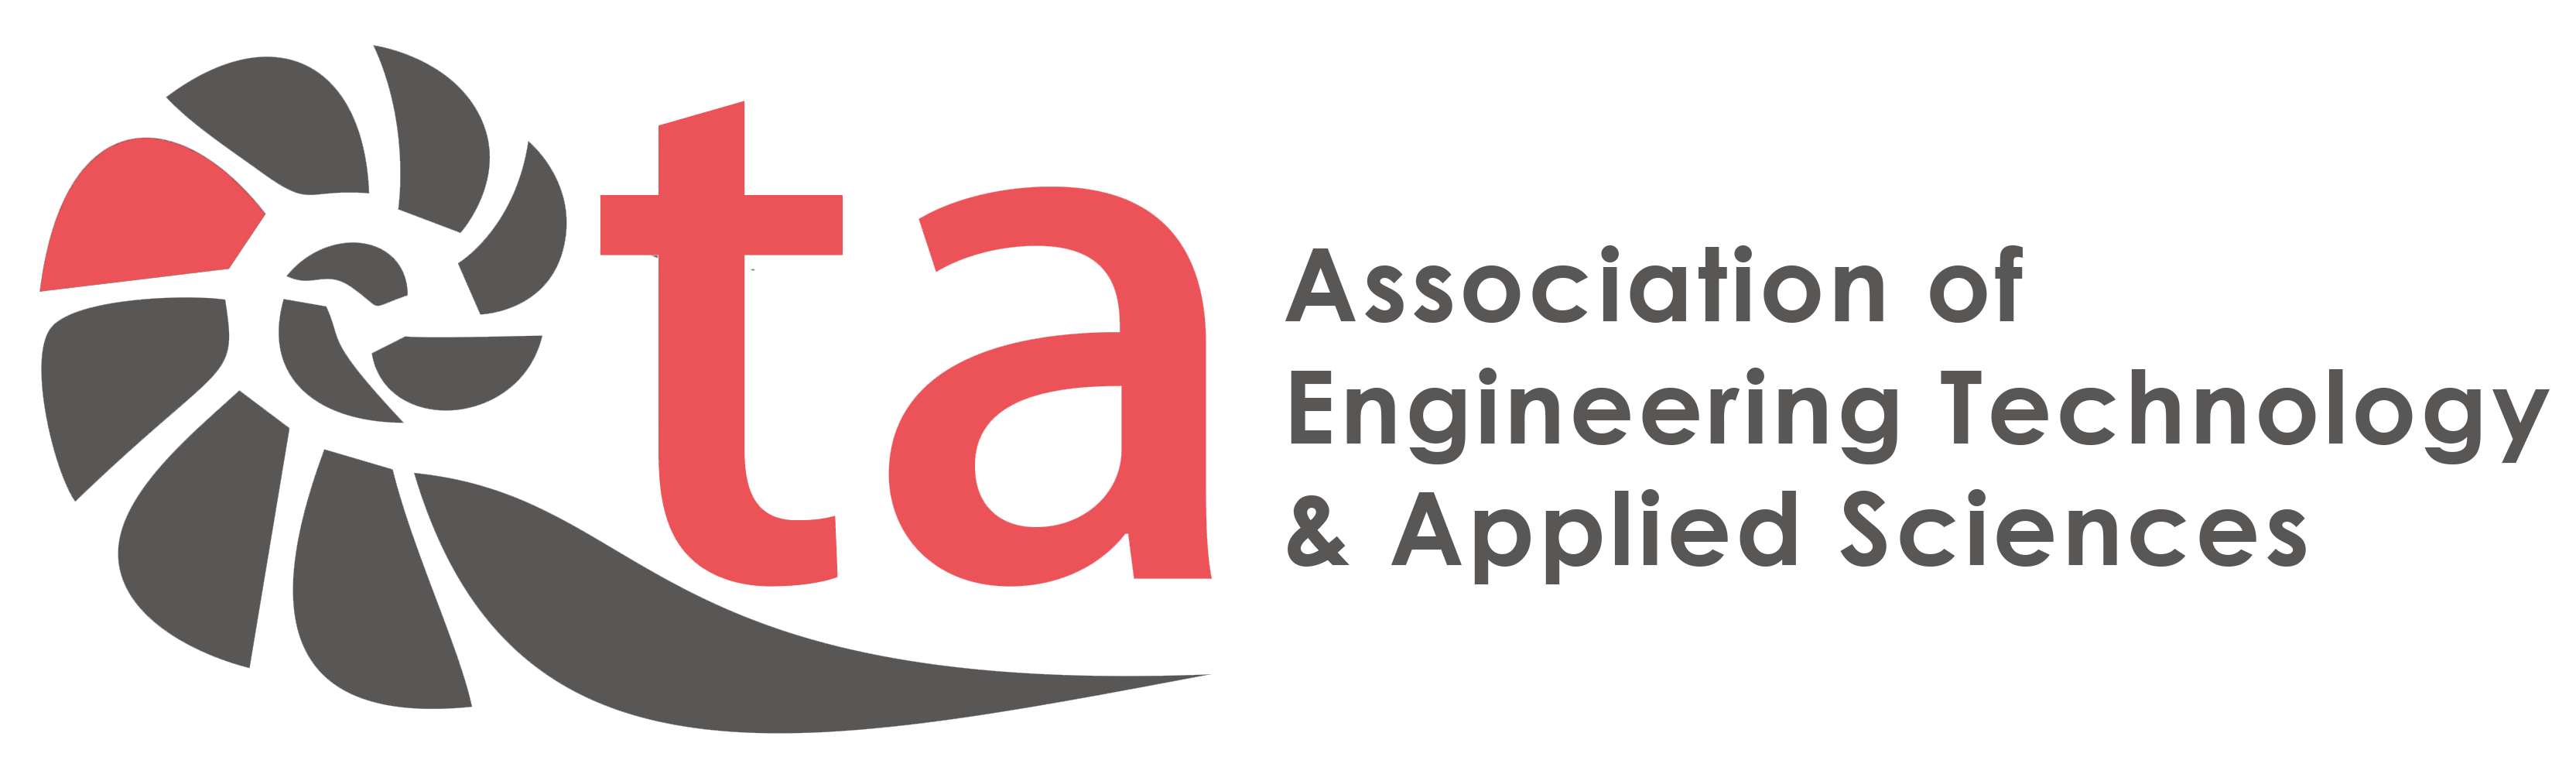 AETA International Conference on Dynamics of Engineering Technology, Applied Sciences, Software Applications & Cloud Computing  (DEAS)